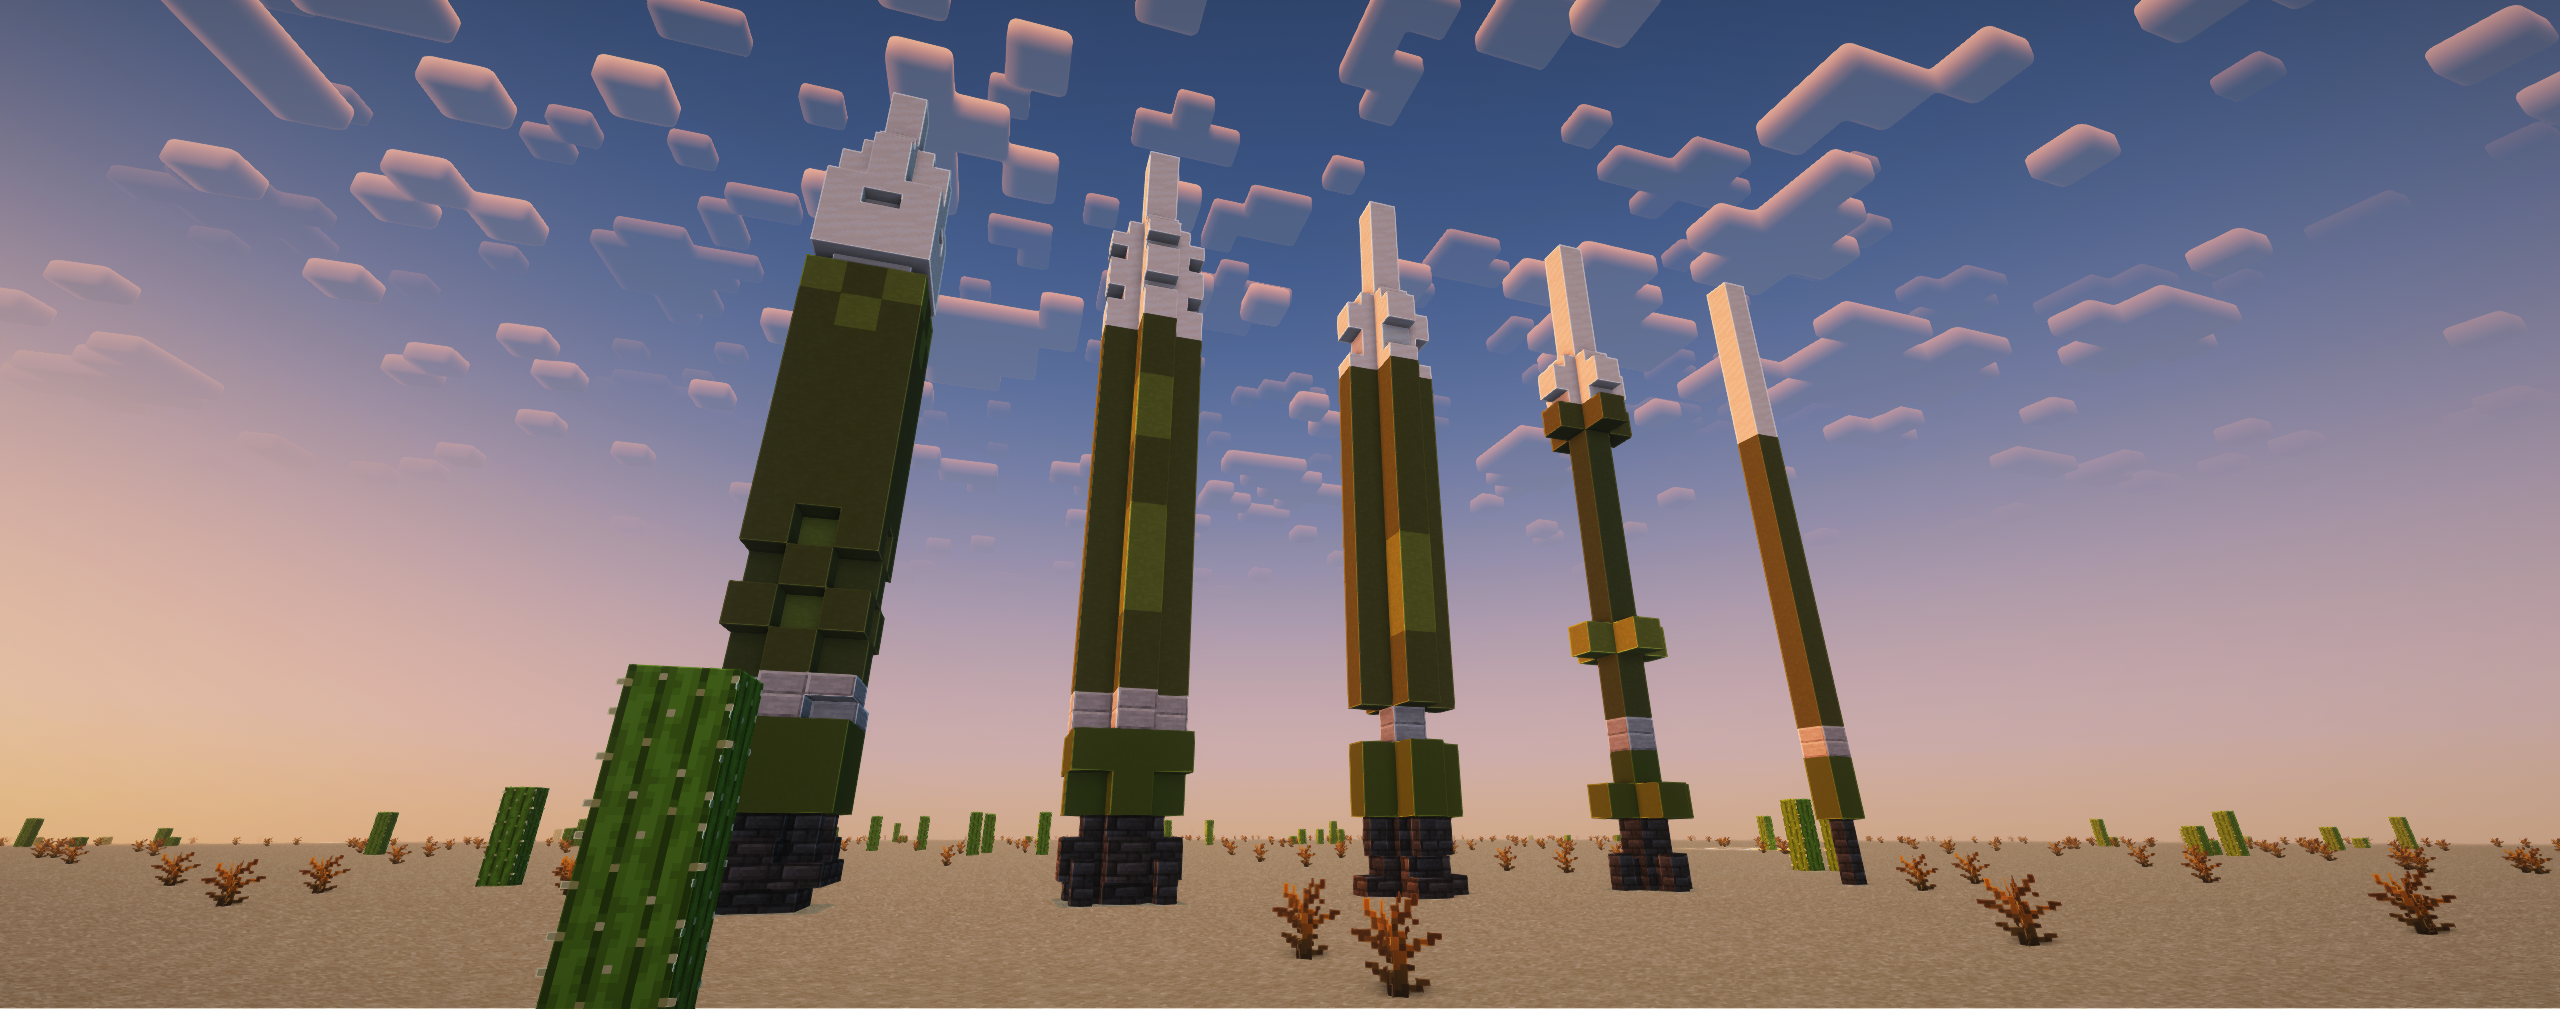 Tier 1 -> 5 Missiles (Right to Left)